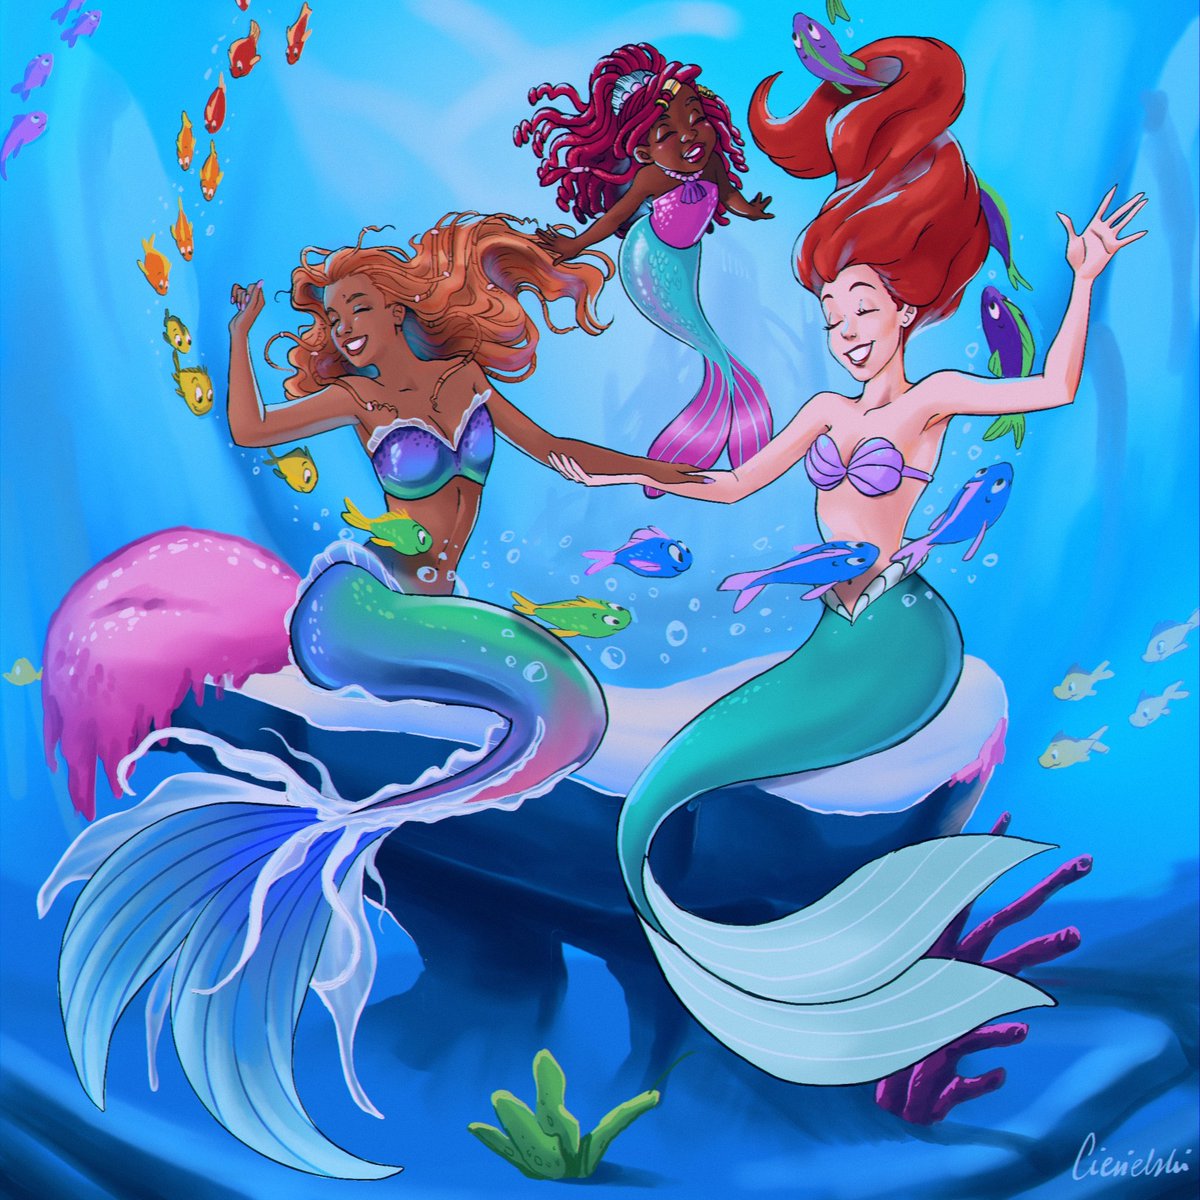 ariel in the multiverse of kindness 

#ariel #thelittlemermaid #disney #princess